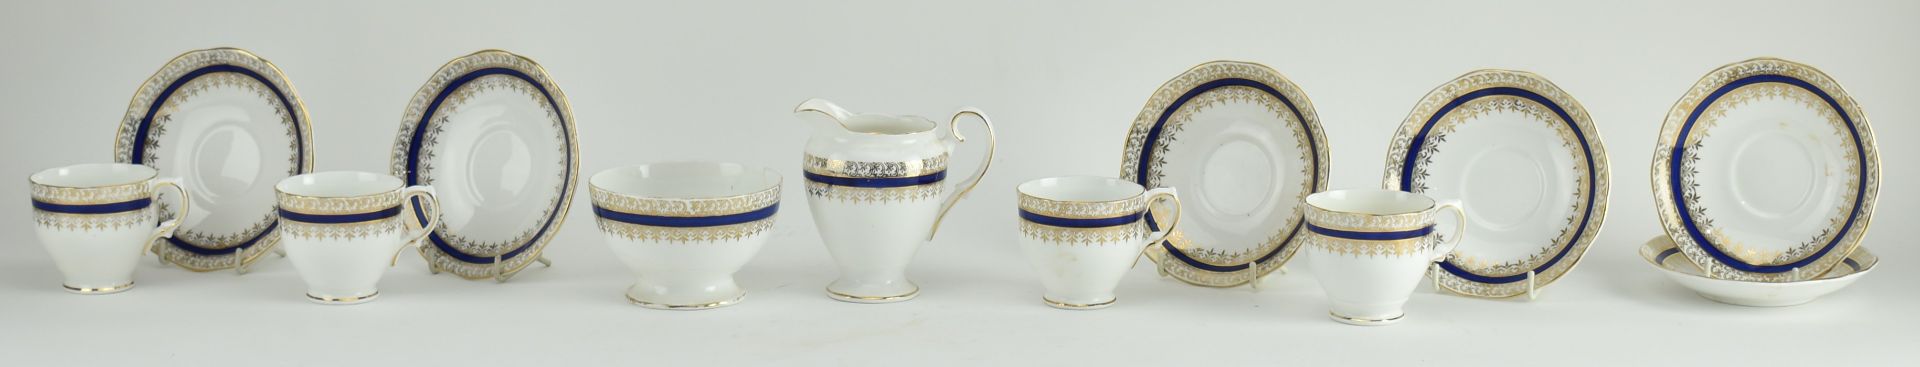 STAFFORDSHIRE, ALFRED MEAKIN ETC. COLLECTION OF PORCELAIN - Image 15 of 22